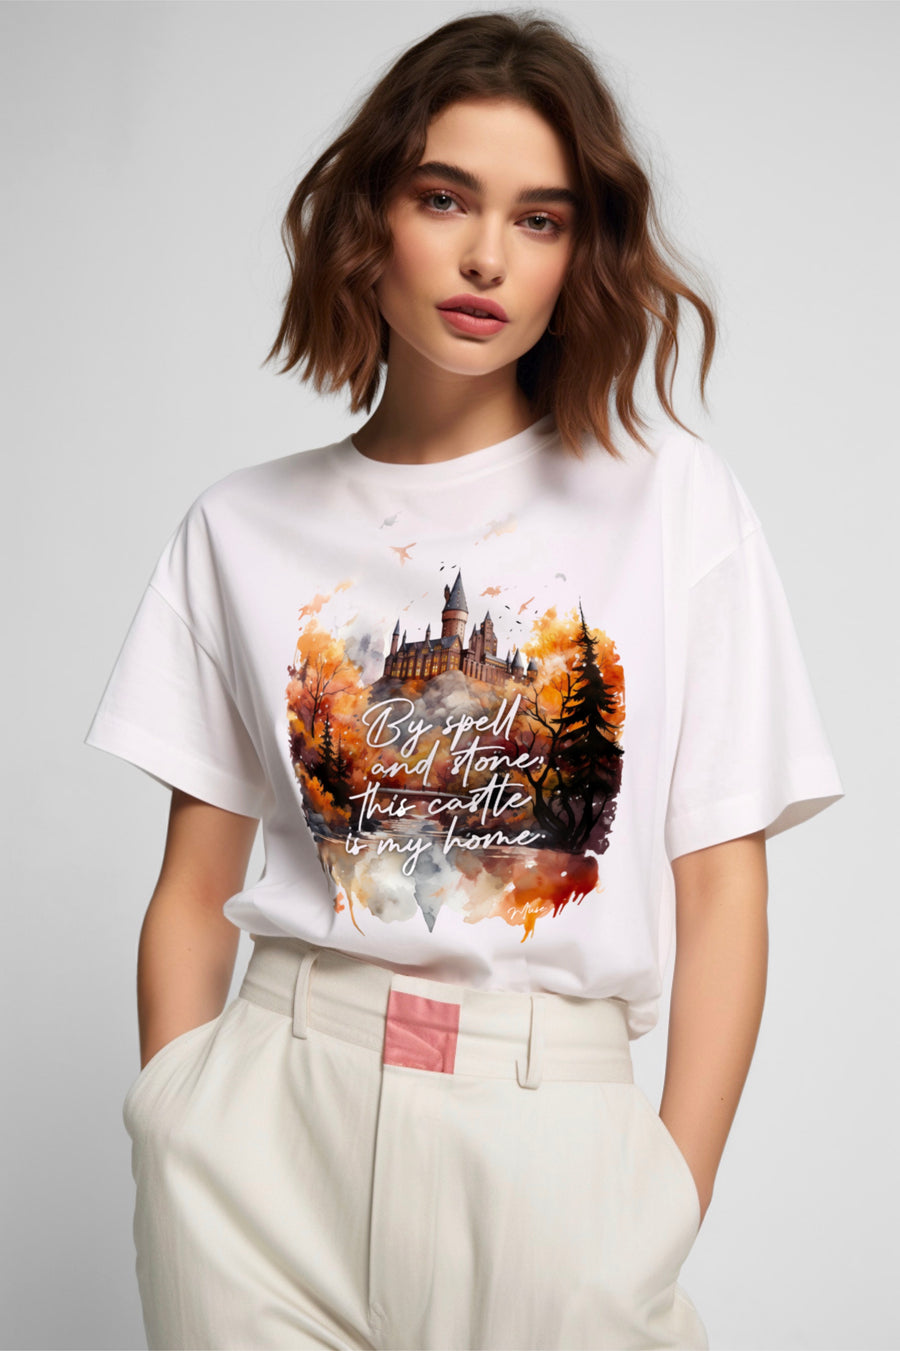 T-shirt | By spell and stone, this castle is my home (automne)